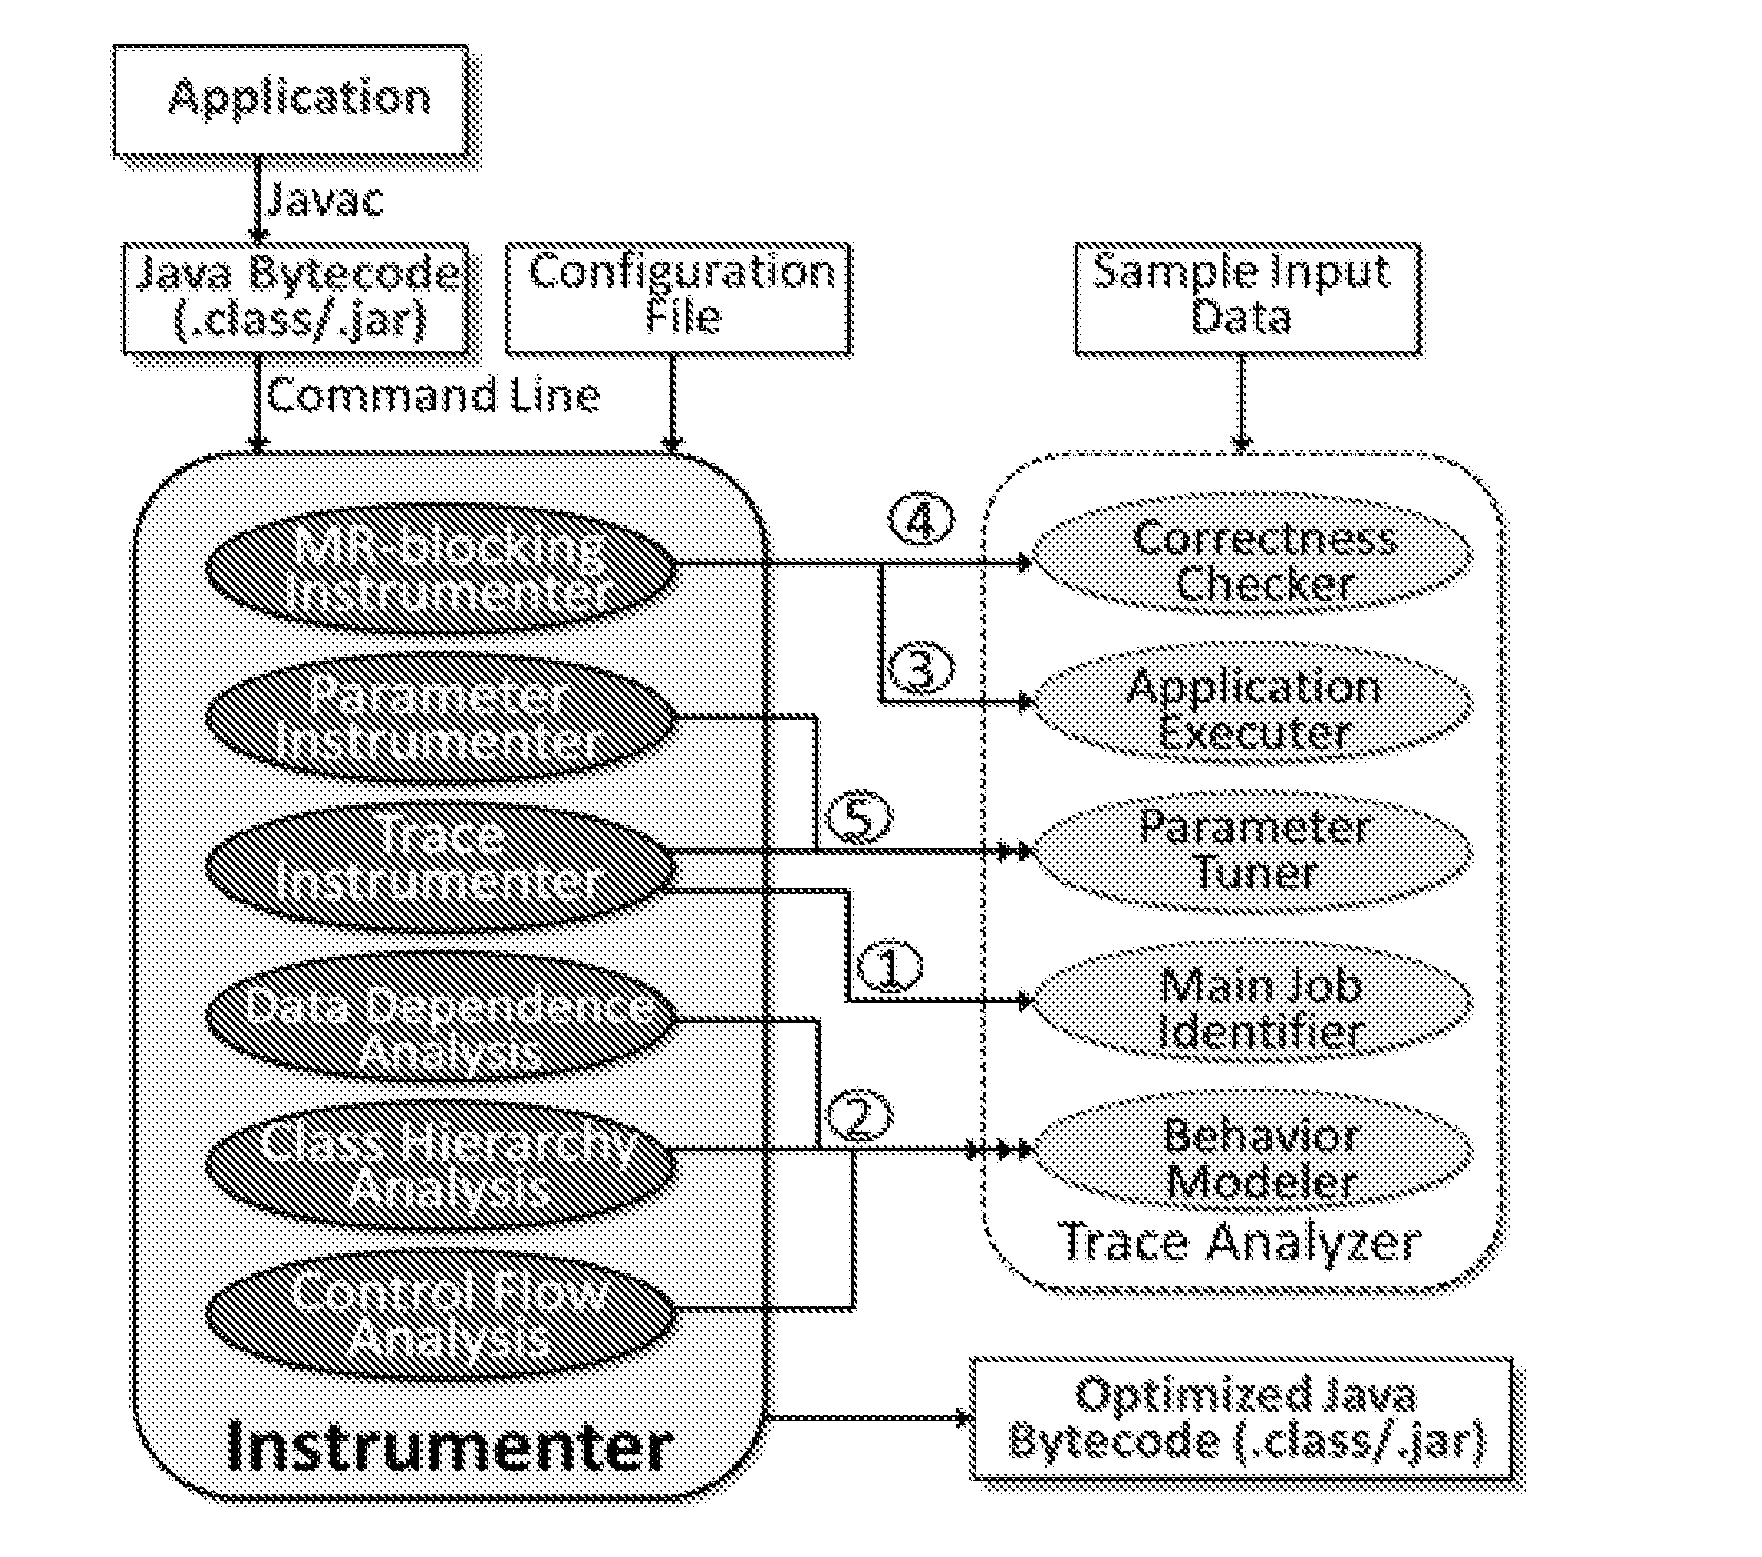 Computer-Guided Holistic Optimization of MapReduce Applications